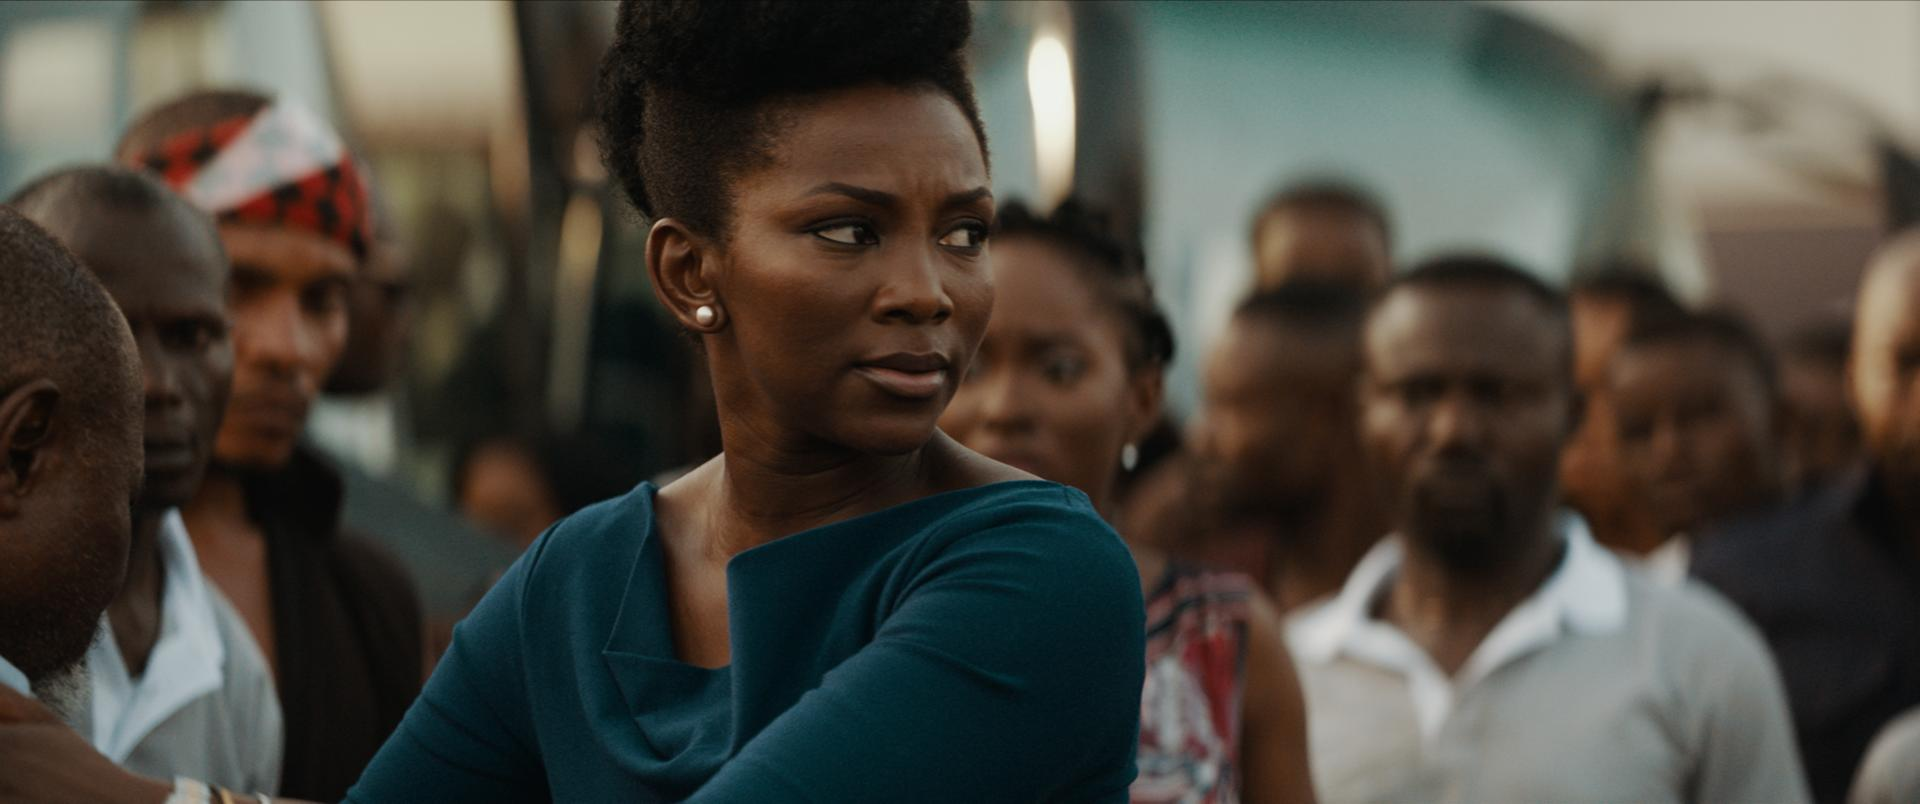 Netflix Acquires Its First Movie From Nigeria